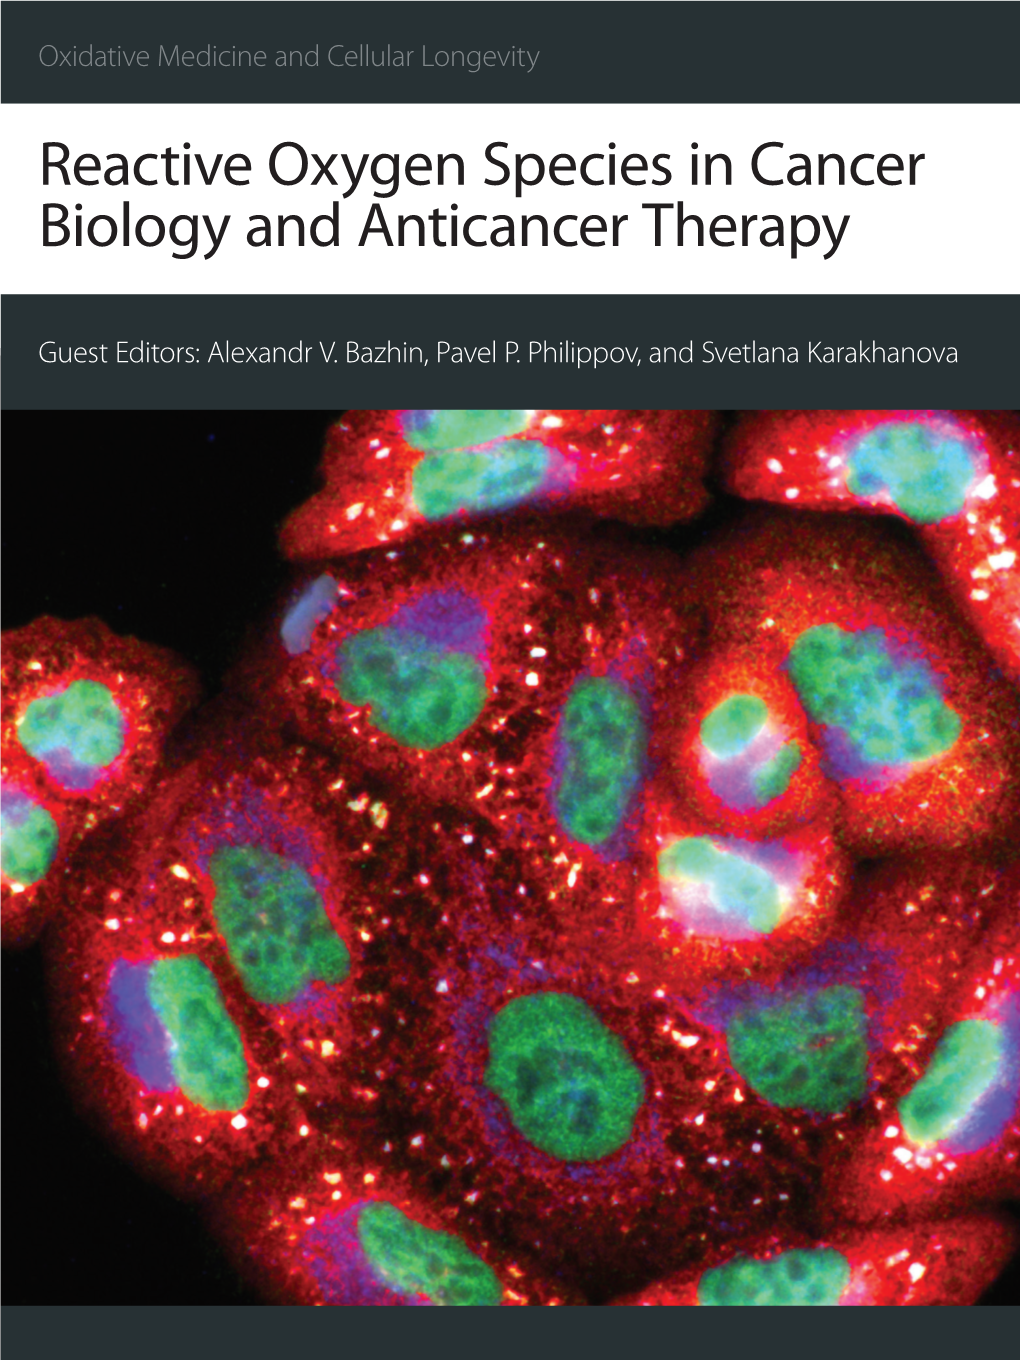 Reactive Oxygen Species in Cancer Biology and Anticancer Therapy